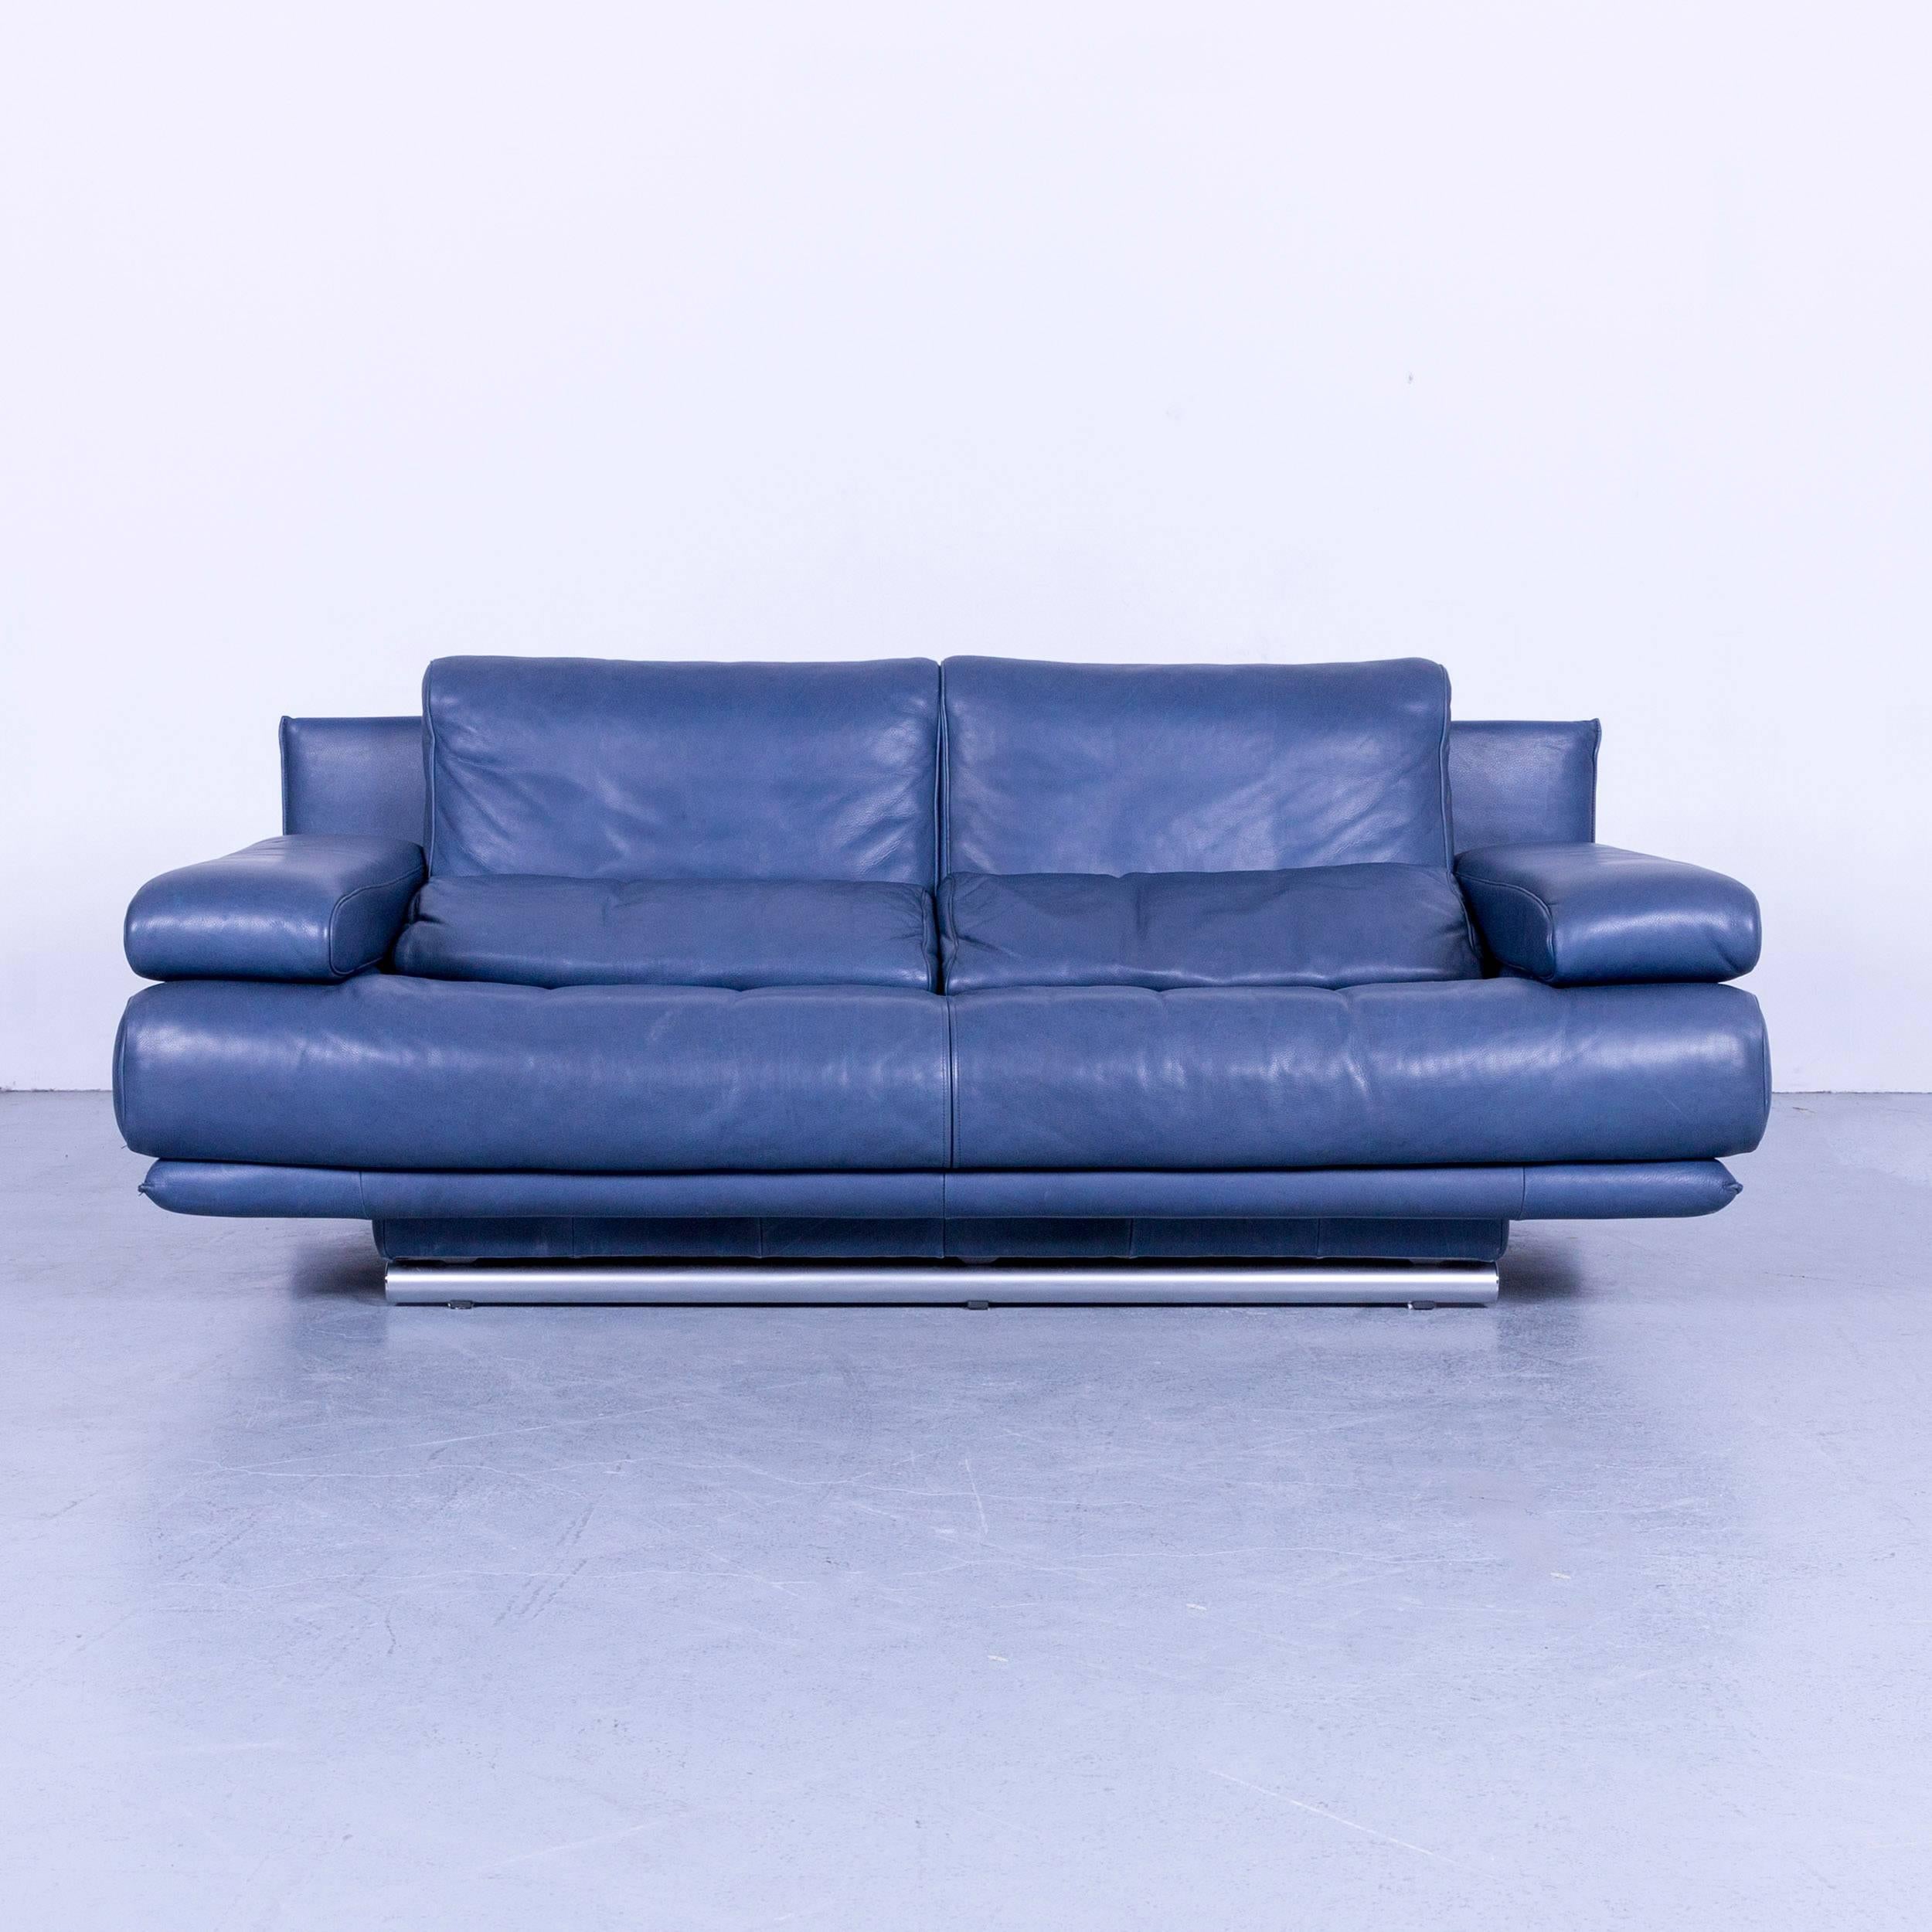 Contemporary Rolf Benz 6500 Designer Leather Sofa Blue Two-Seat